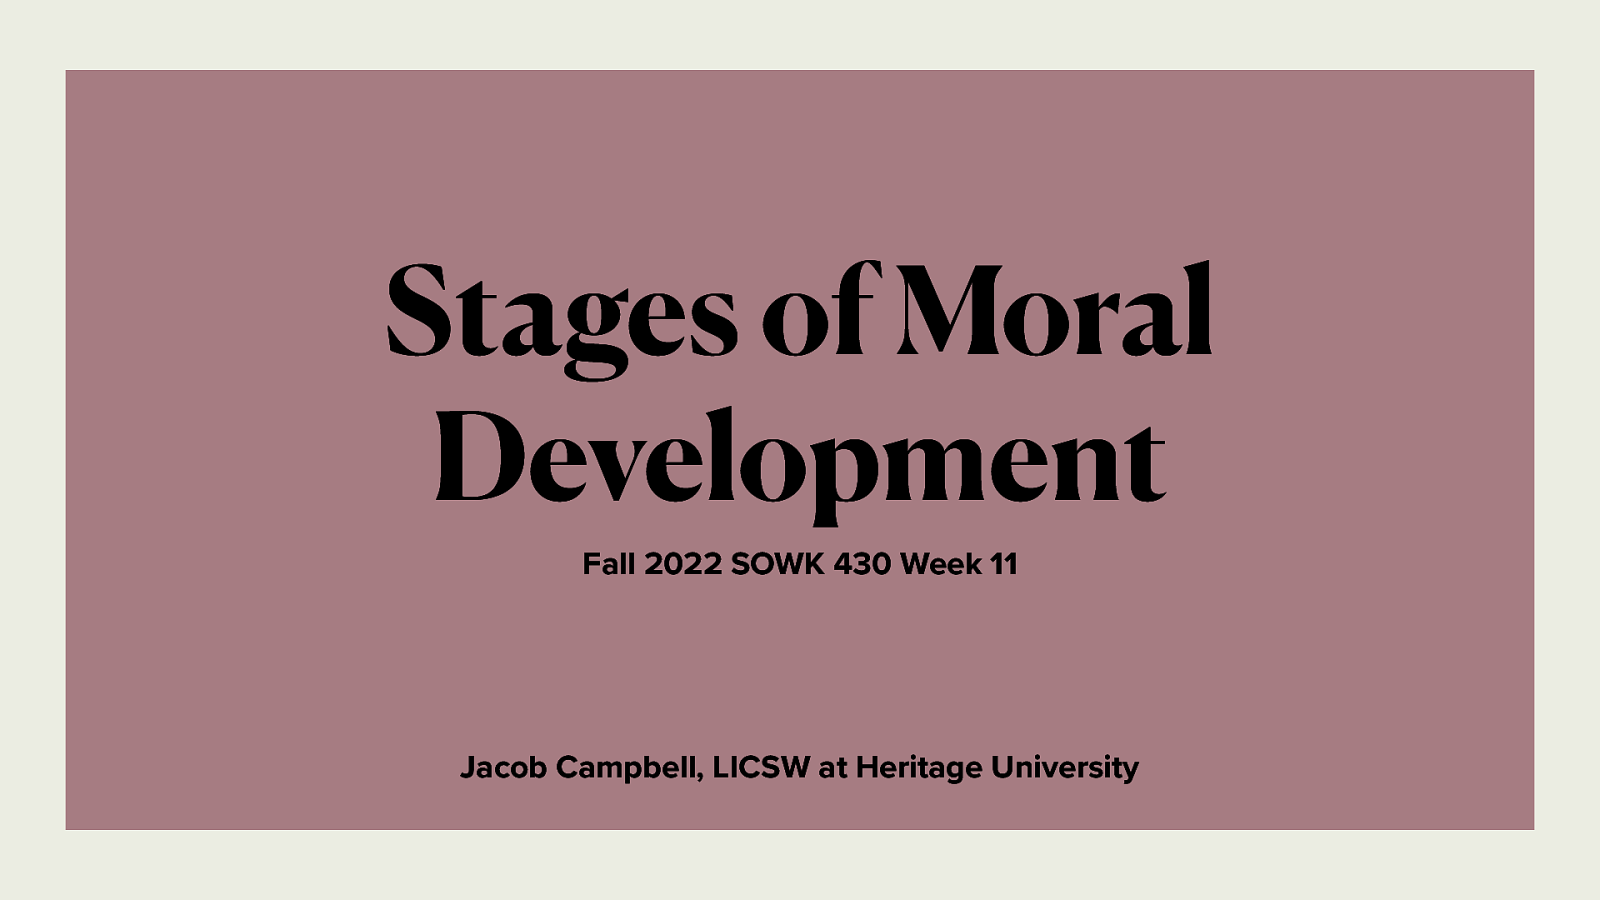 Fall 2022 SOWK 430 Week 11 - Stages of Moral Development